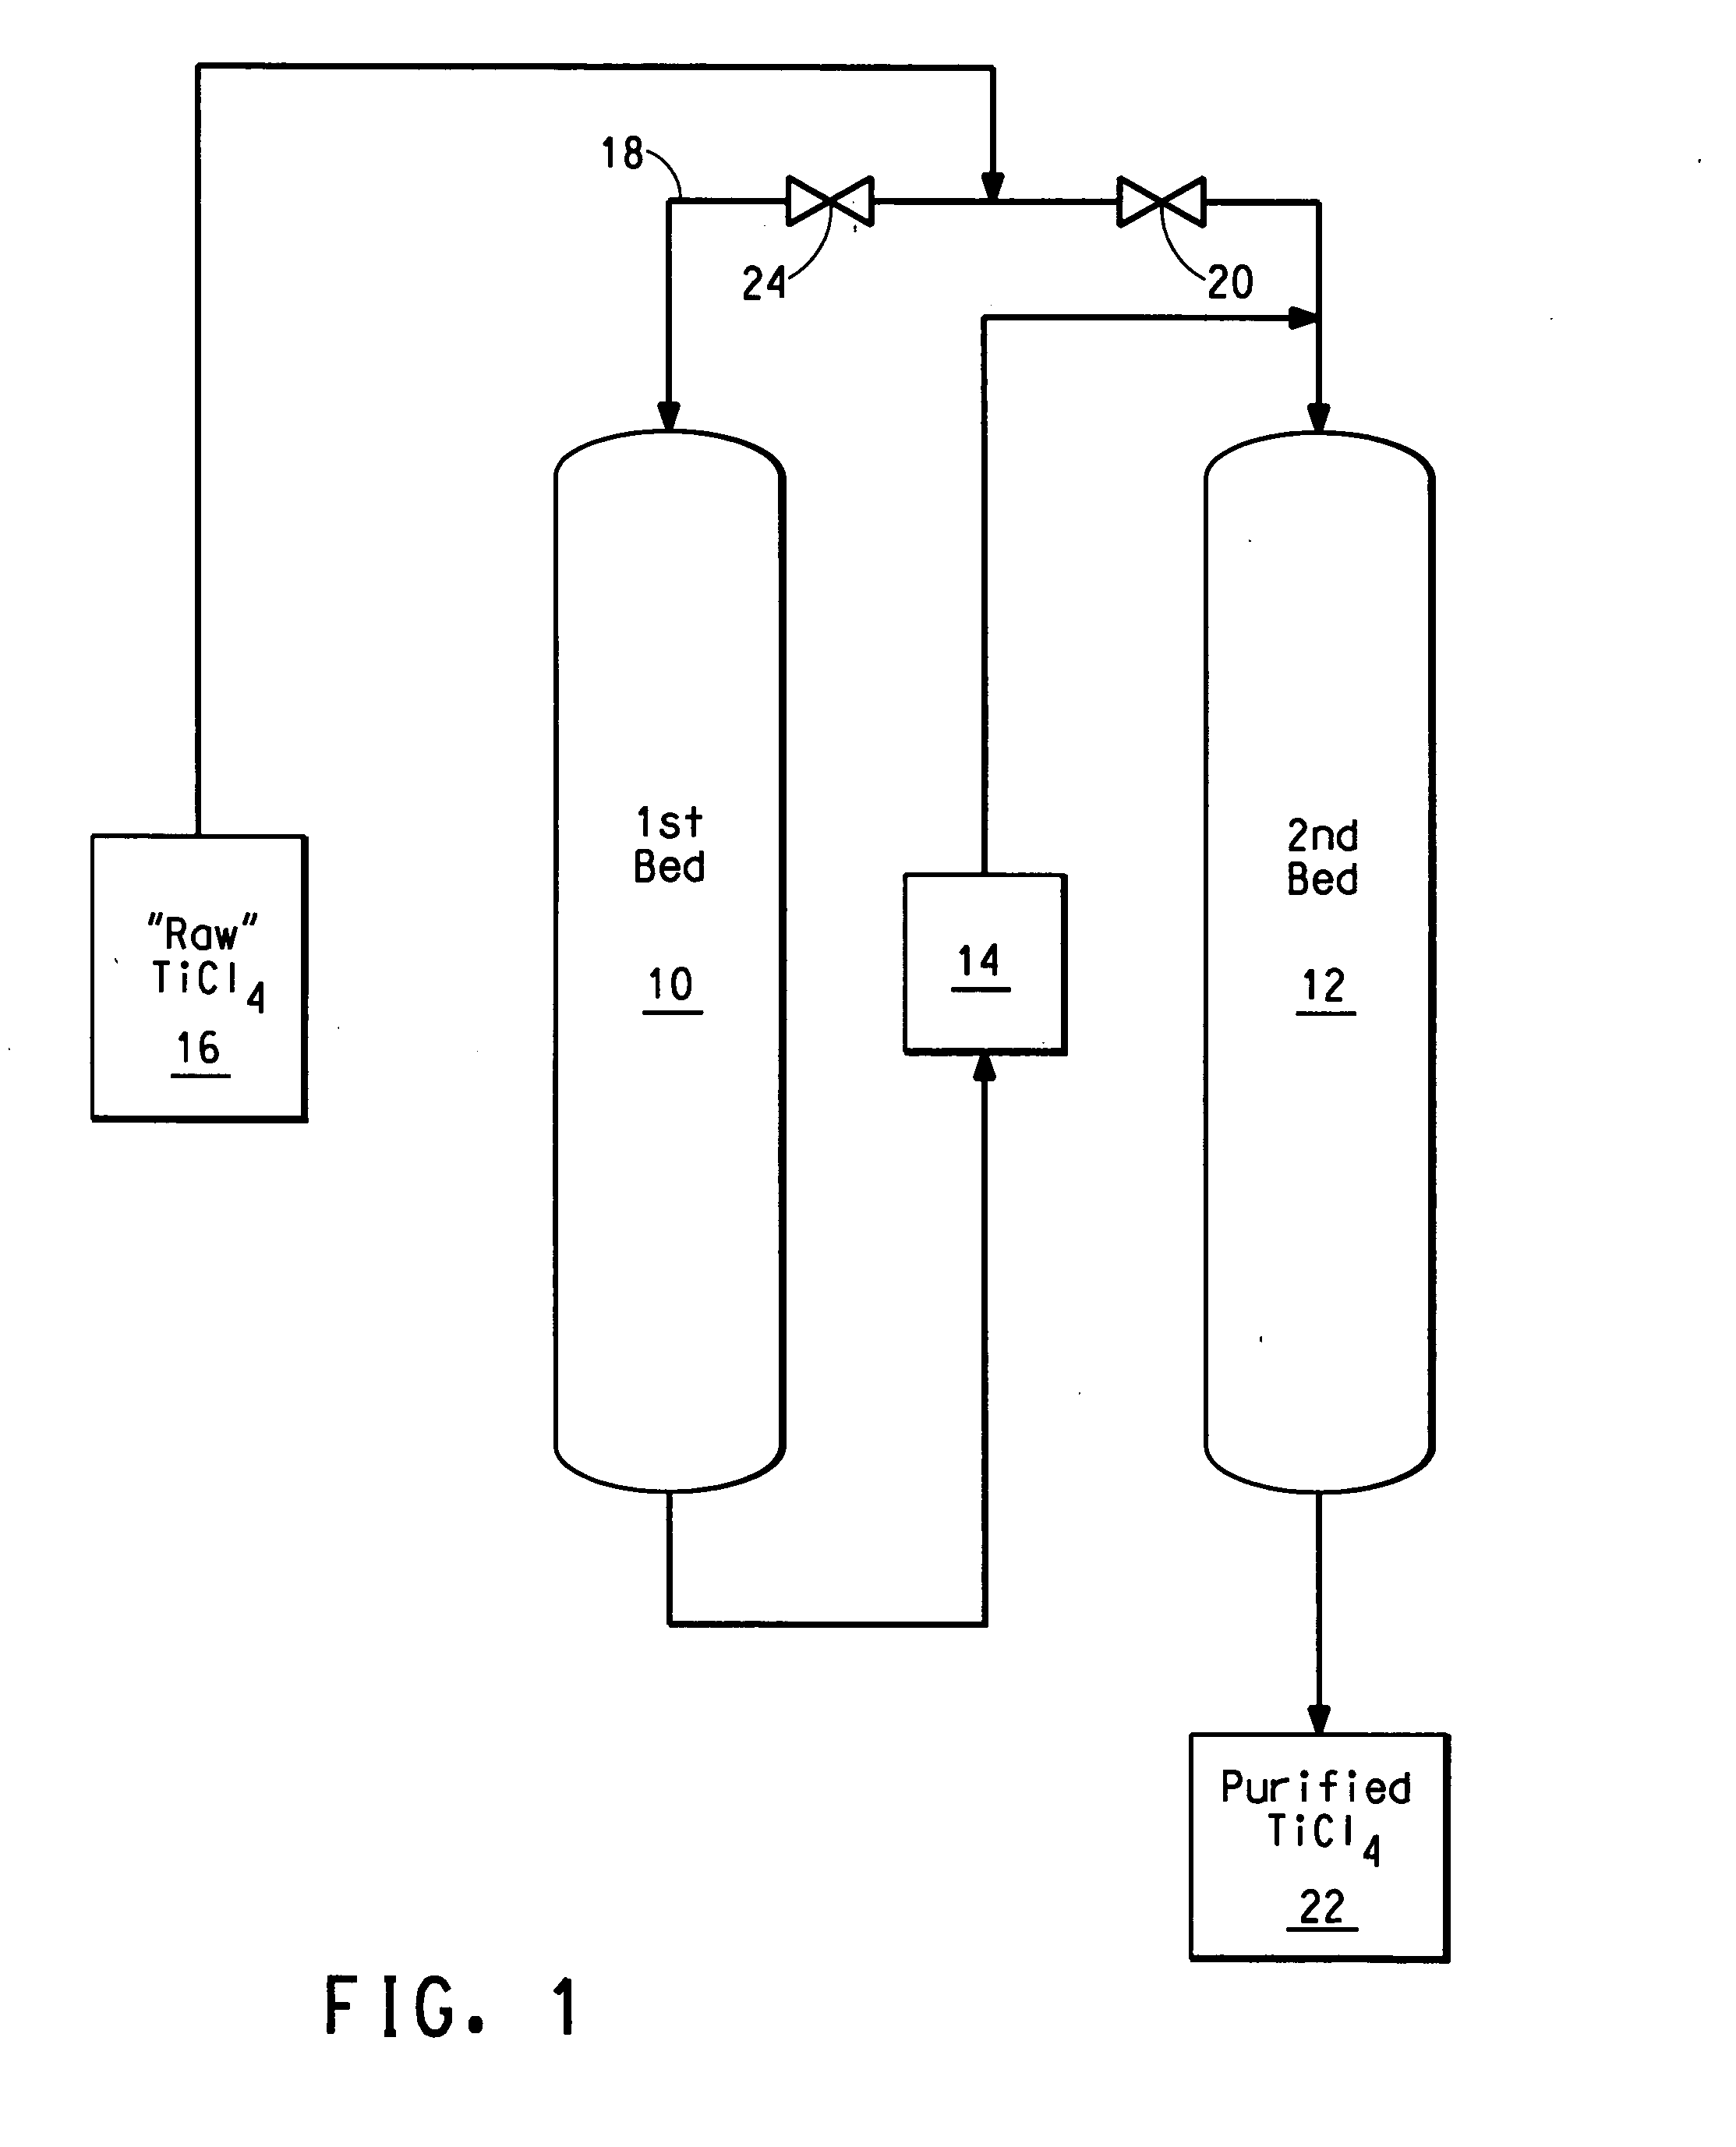 Process for purifying titanium chloride-containing feedstock